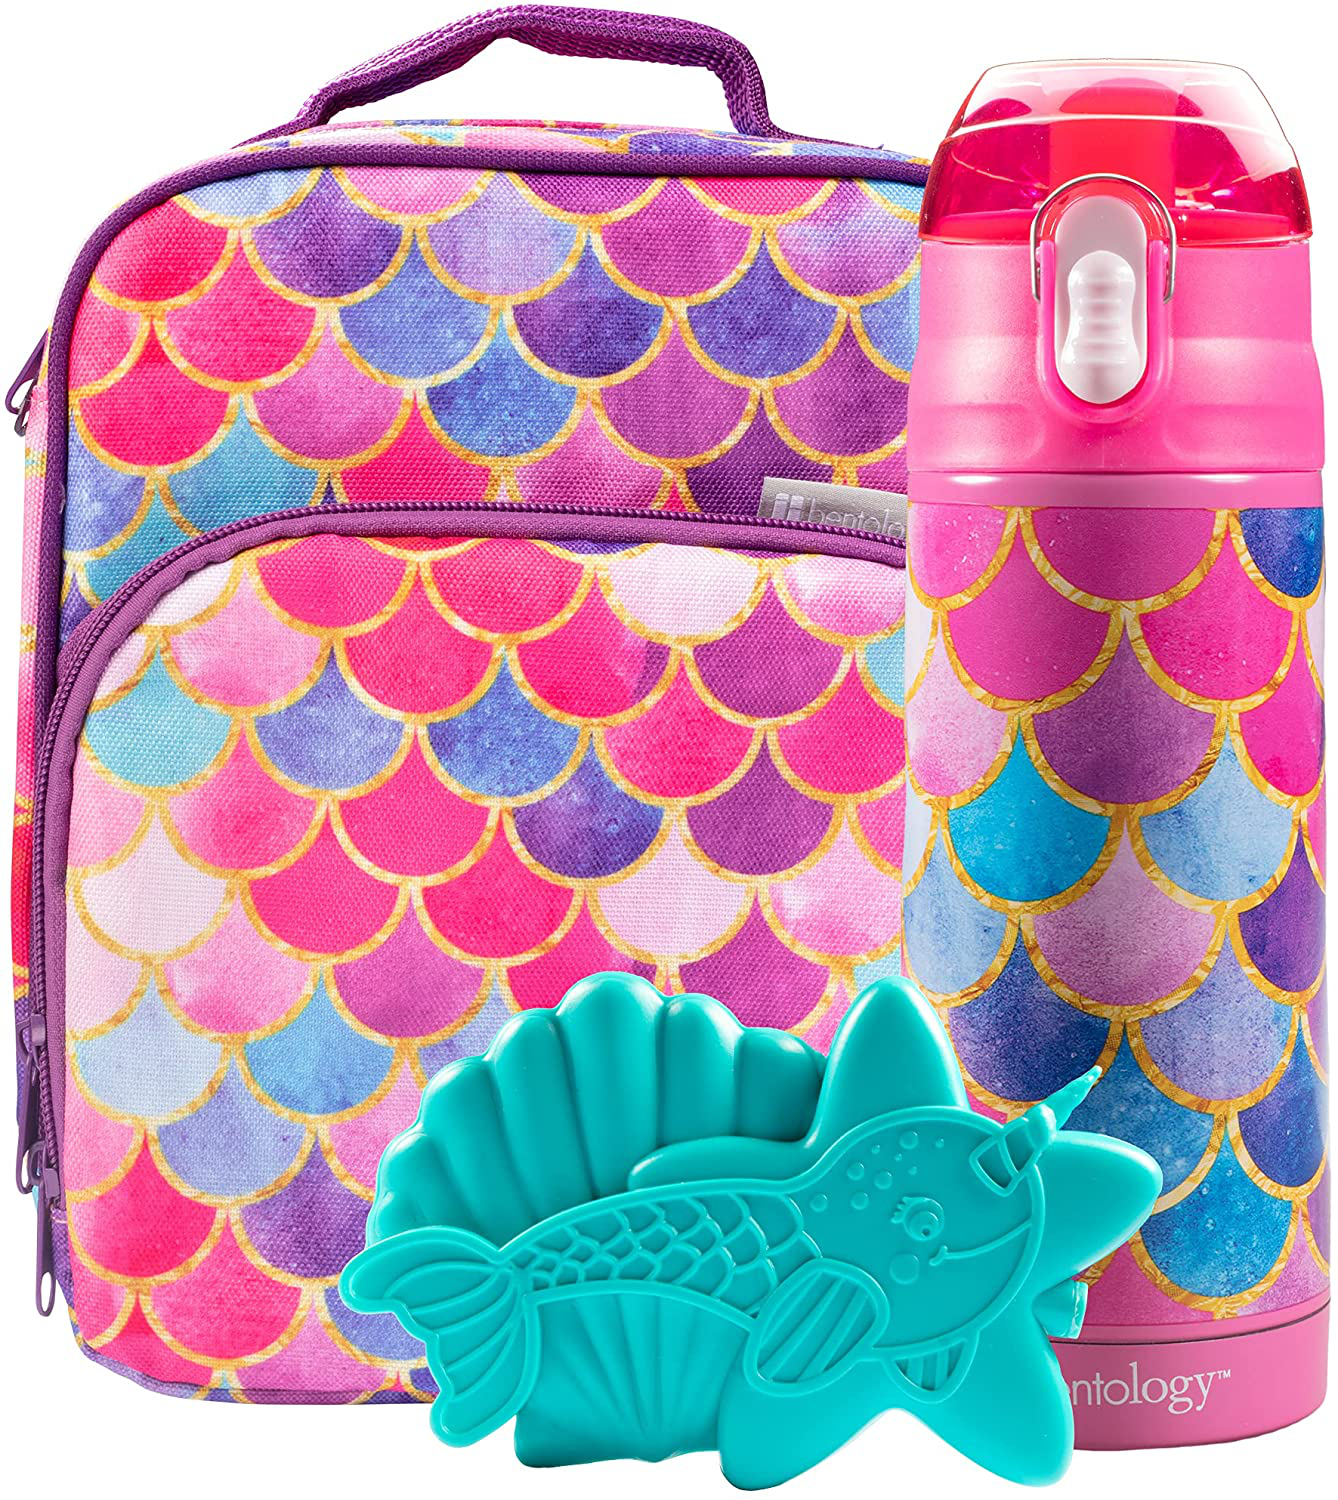 Bentology Lunch Box Set for Kids - Girls Insulated Lunchbox Tote, Water Bottle, and Ice Pack - 3 Pieces - Kitty